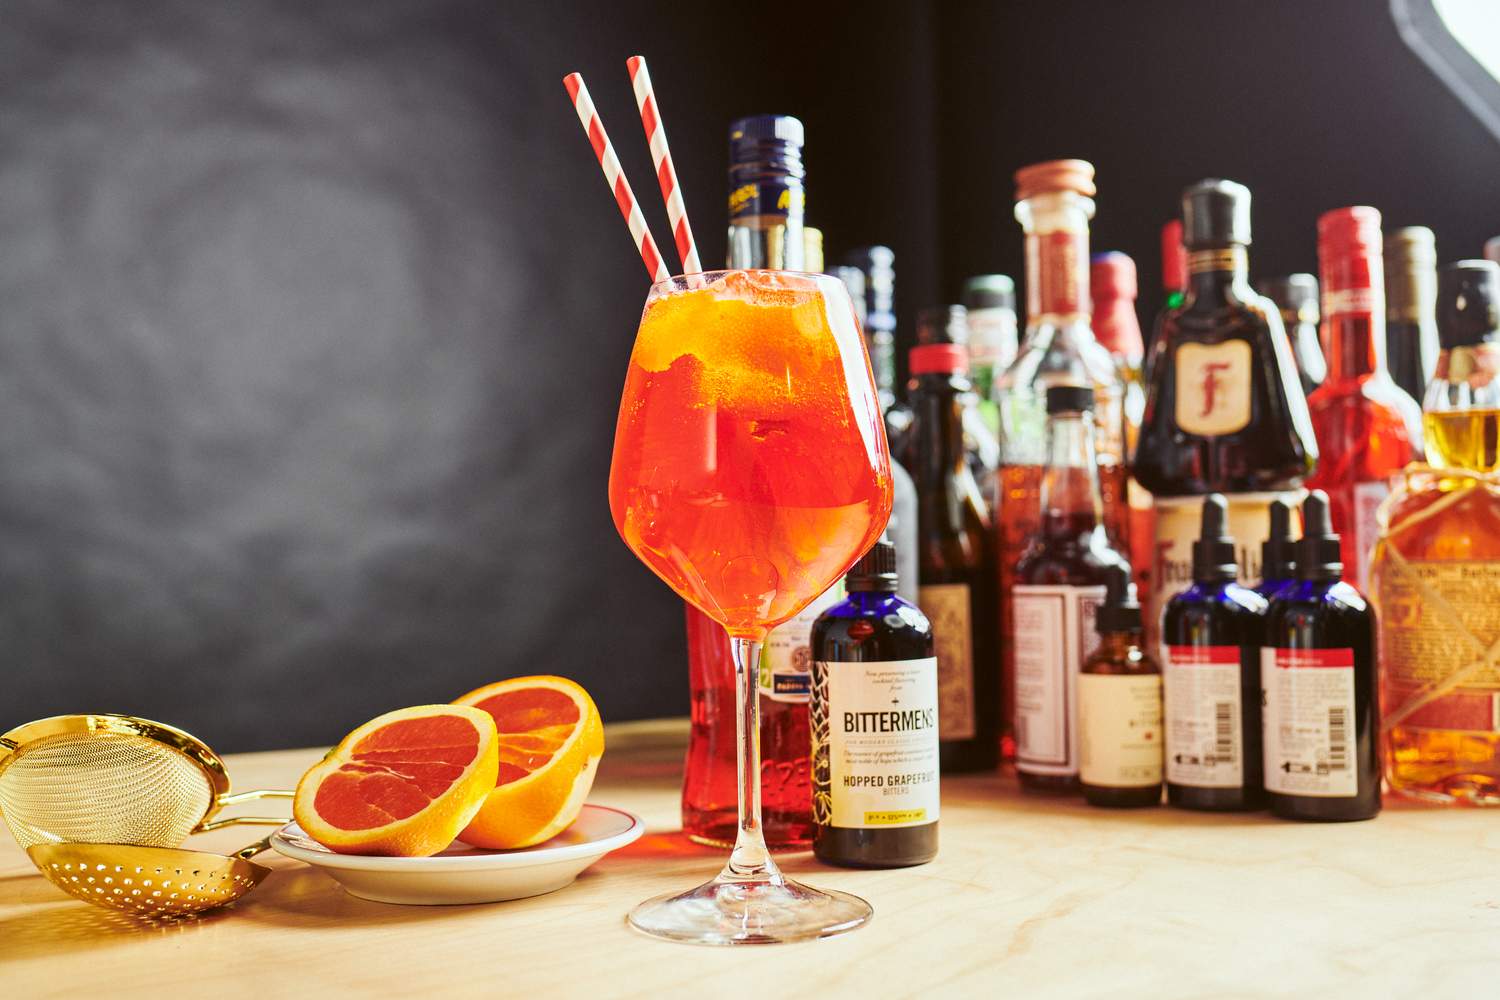 The Aperol spritz is a classic offered at Arthur & Sons. MADONNA + CHILD